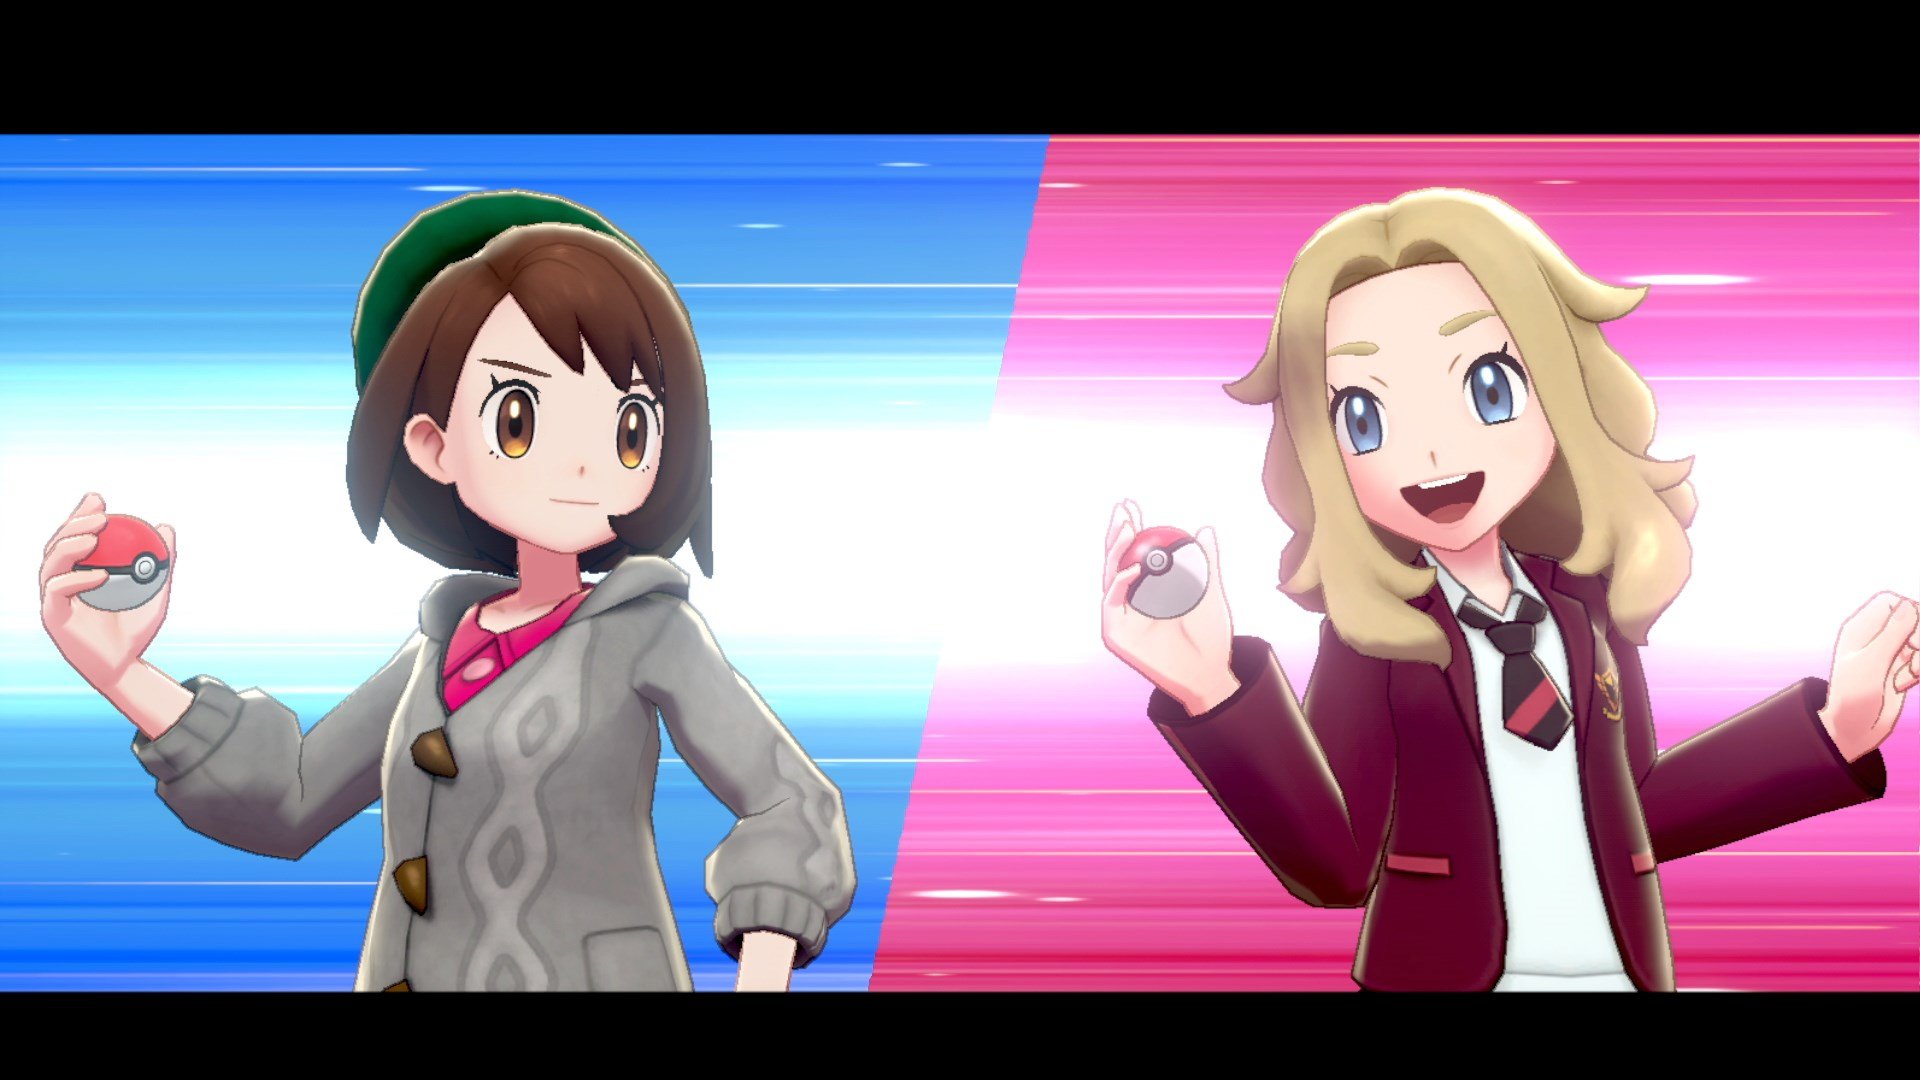 Rose on X: Heh! Polygon trolling in their review of Pokemon XY by